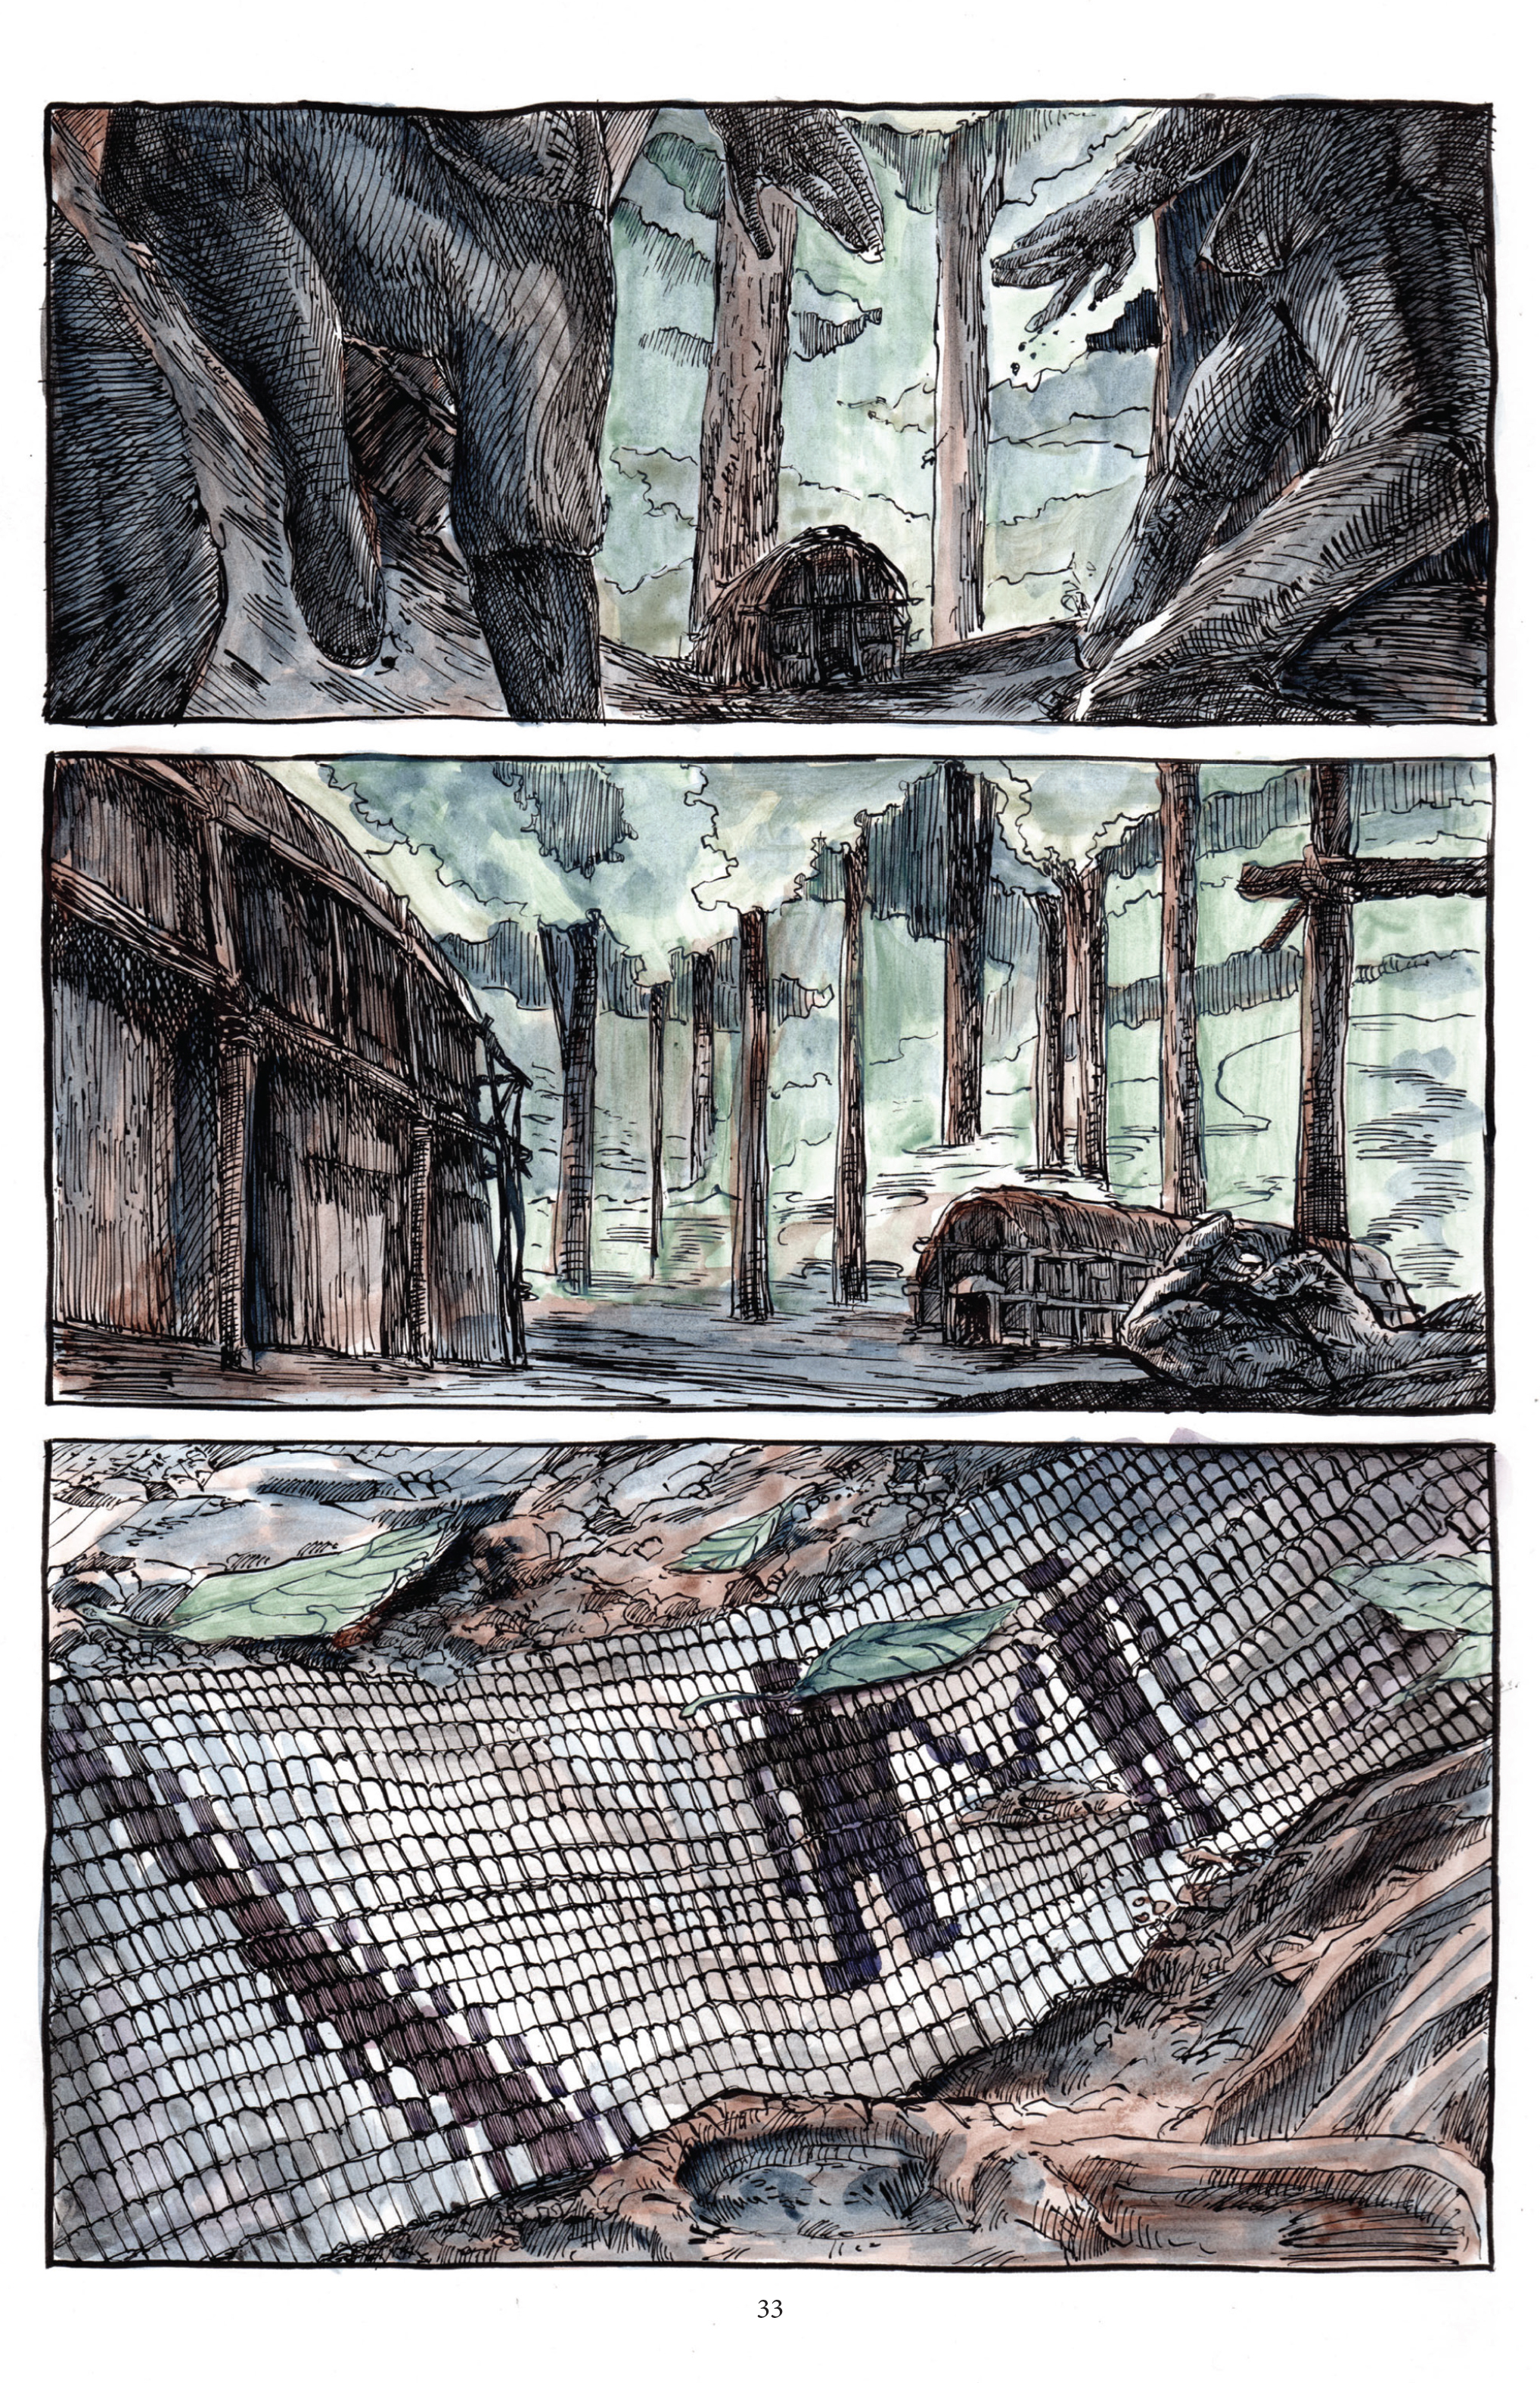 Three panels. Similar to page 20 in reverse. The shadows recede, like smoke, as the village lays in ruins.  Panel One. Full black.  Panel Two. The shadows recede to show the village, still quiet as before, but there are elements of violence, small pieces, like a hand in a doorway or a mark of blood.  Panel Three. We see the village, still and dead. The wampum belt rests in the ashes.